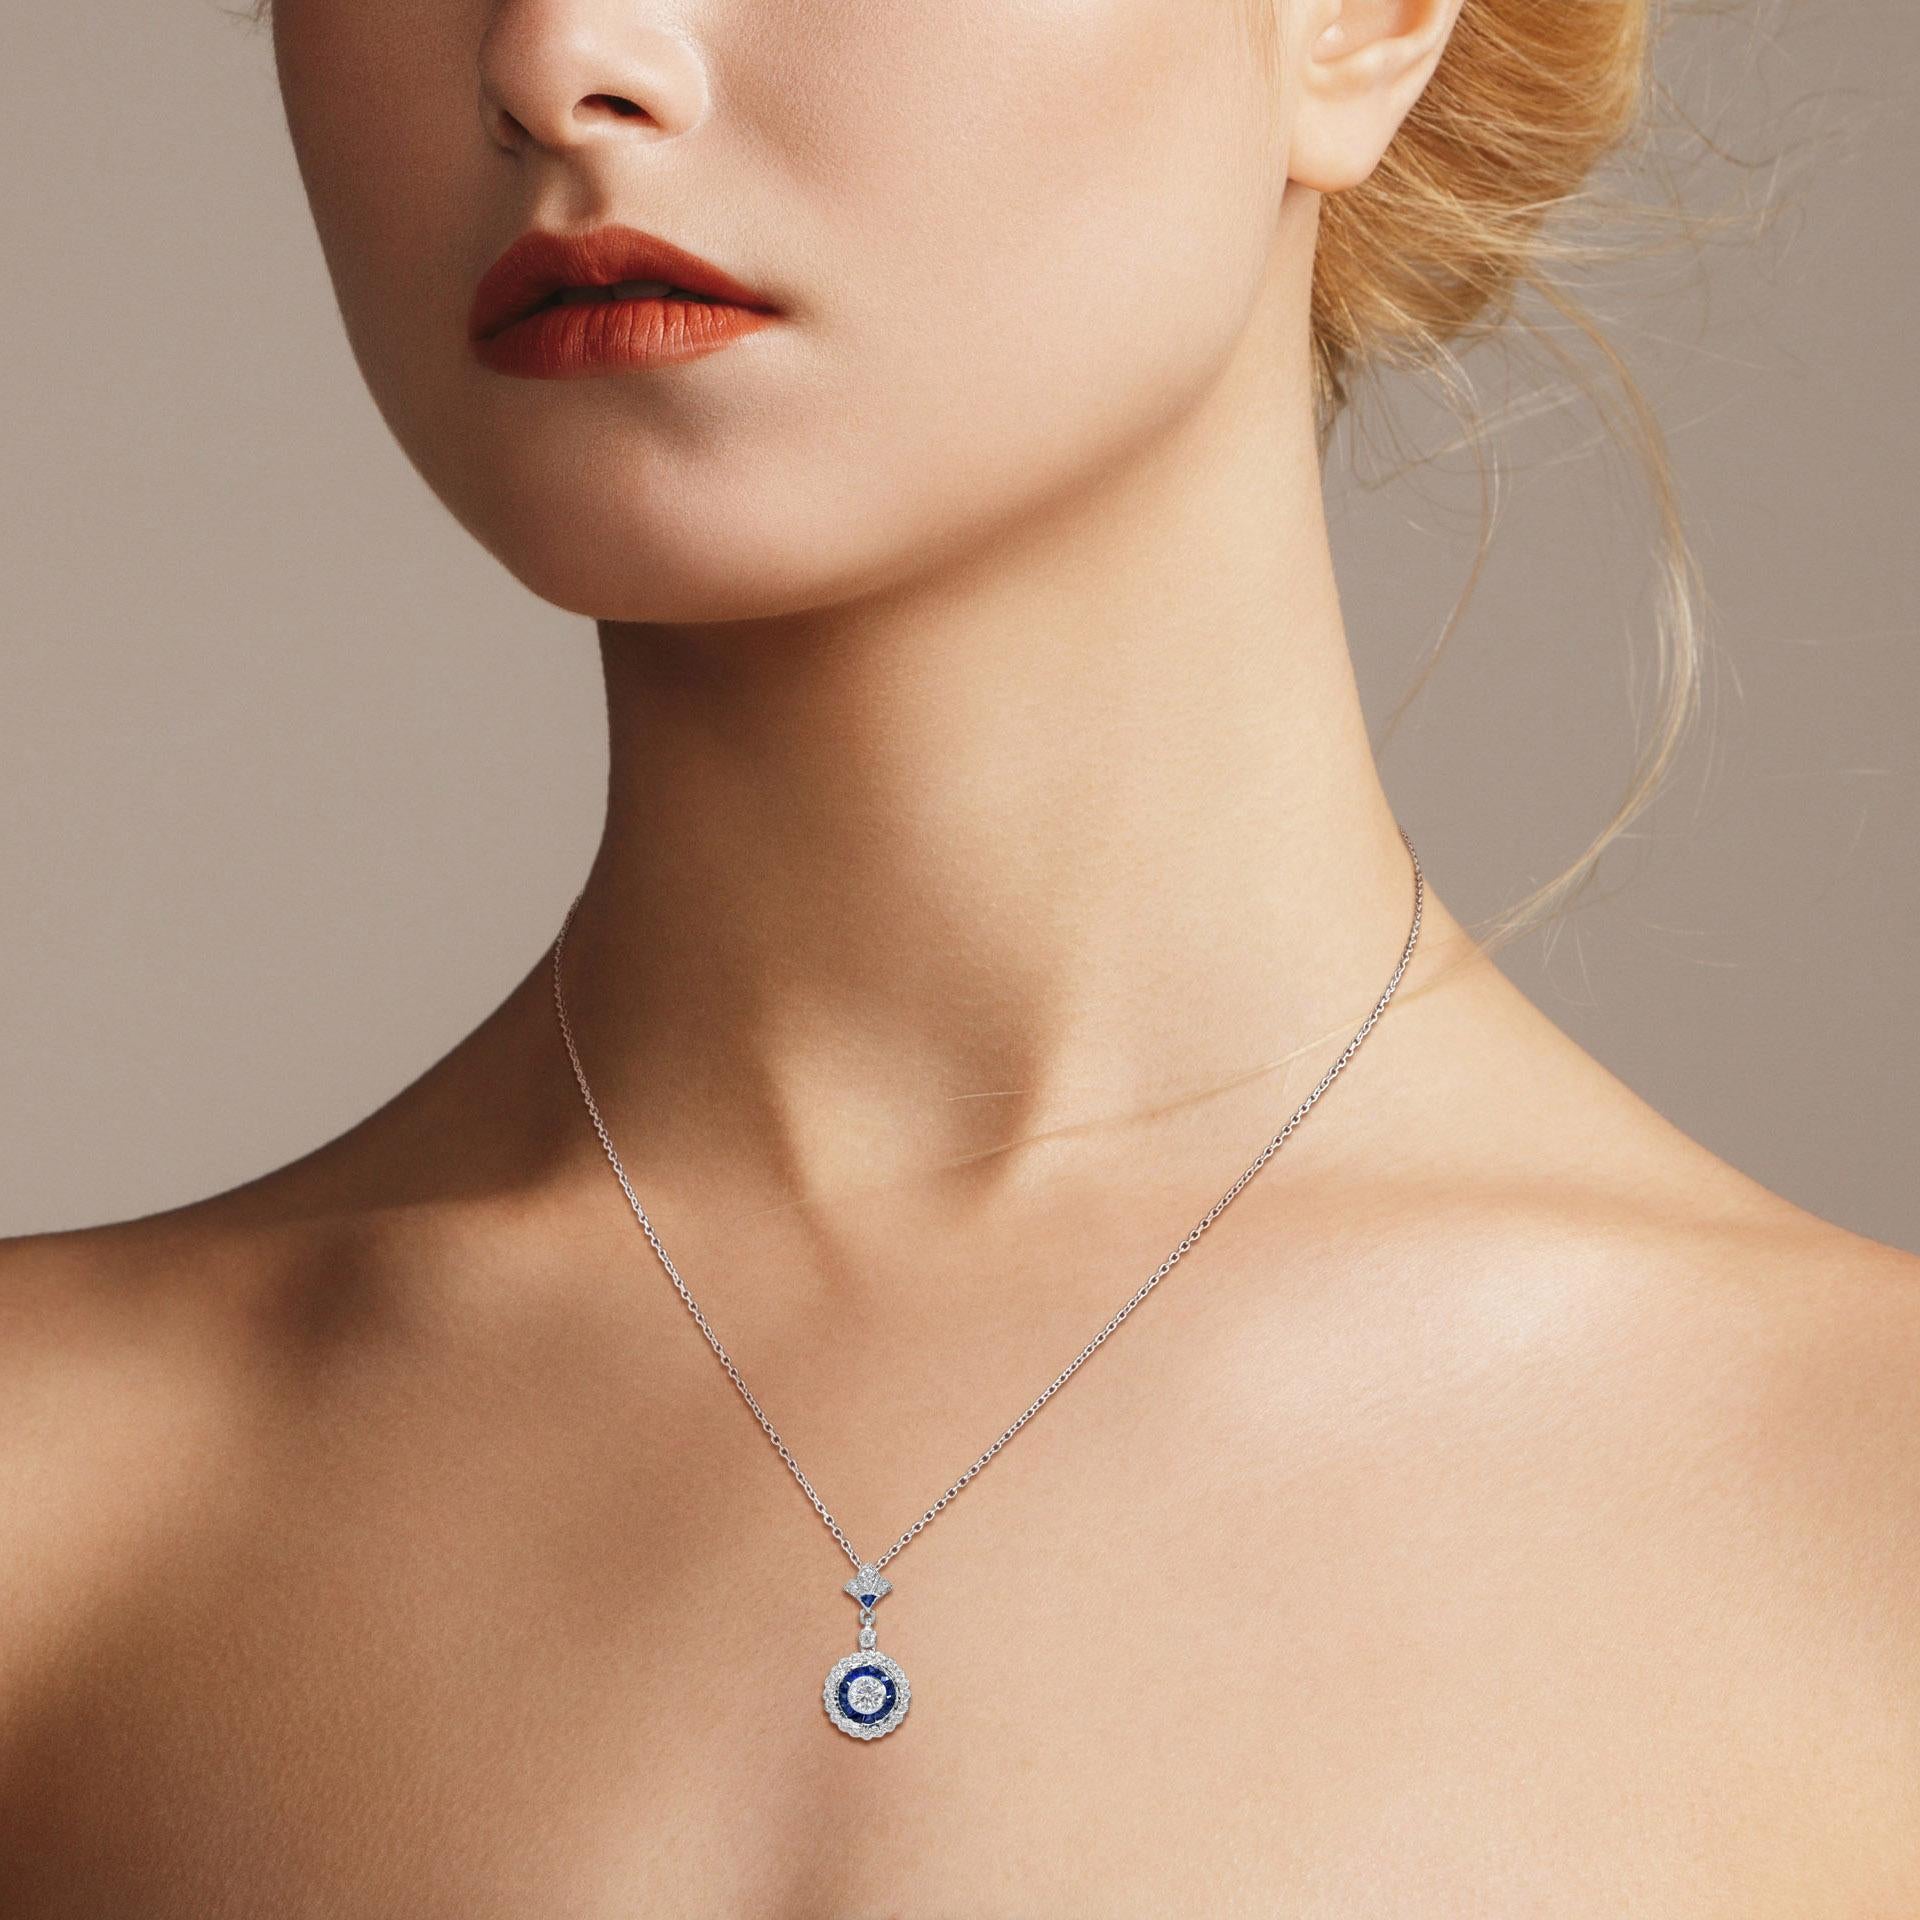 An Art Deco style diamond and sapphire pendant made with 18K white gold. The center diamond is a 0.25 Carat round cut of exceptional brightness. It is surrounded by sapphires that are cut by hand to fit seamlessly together. The sapphire is further